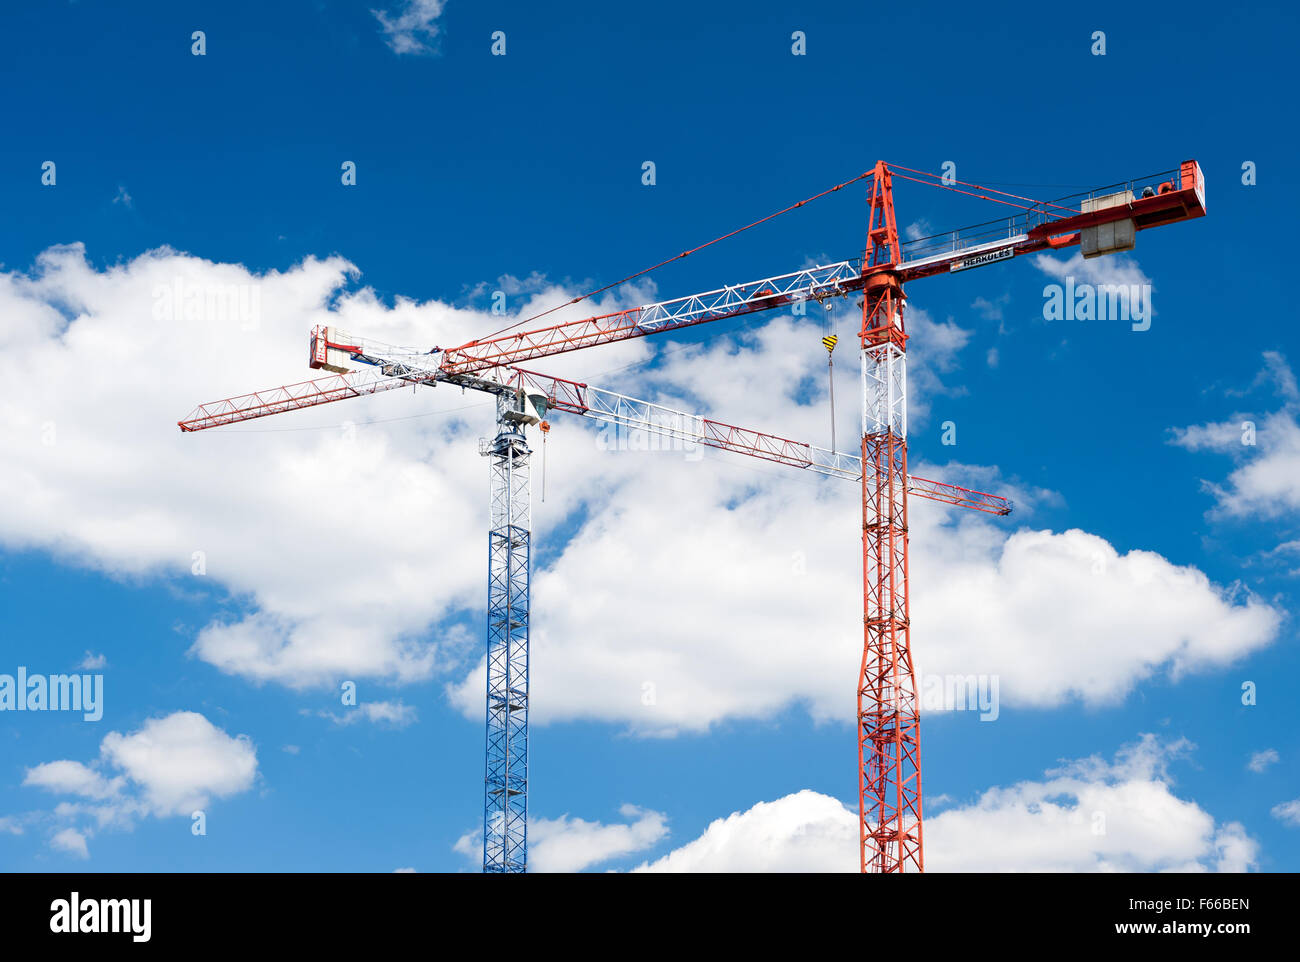 Two cranes build equipment, heavy industry Herkules high construction machines on the blue sky in sunny day in Poland, Europe... Stock Photo